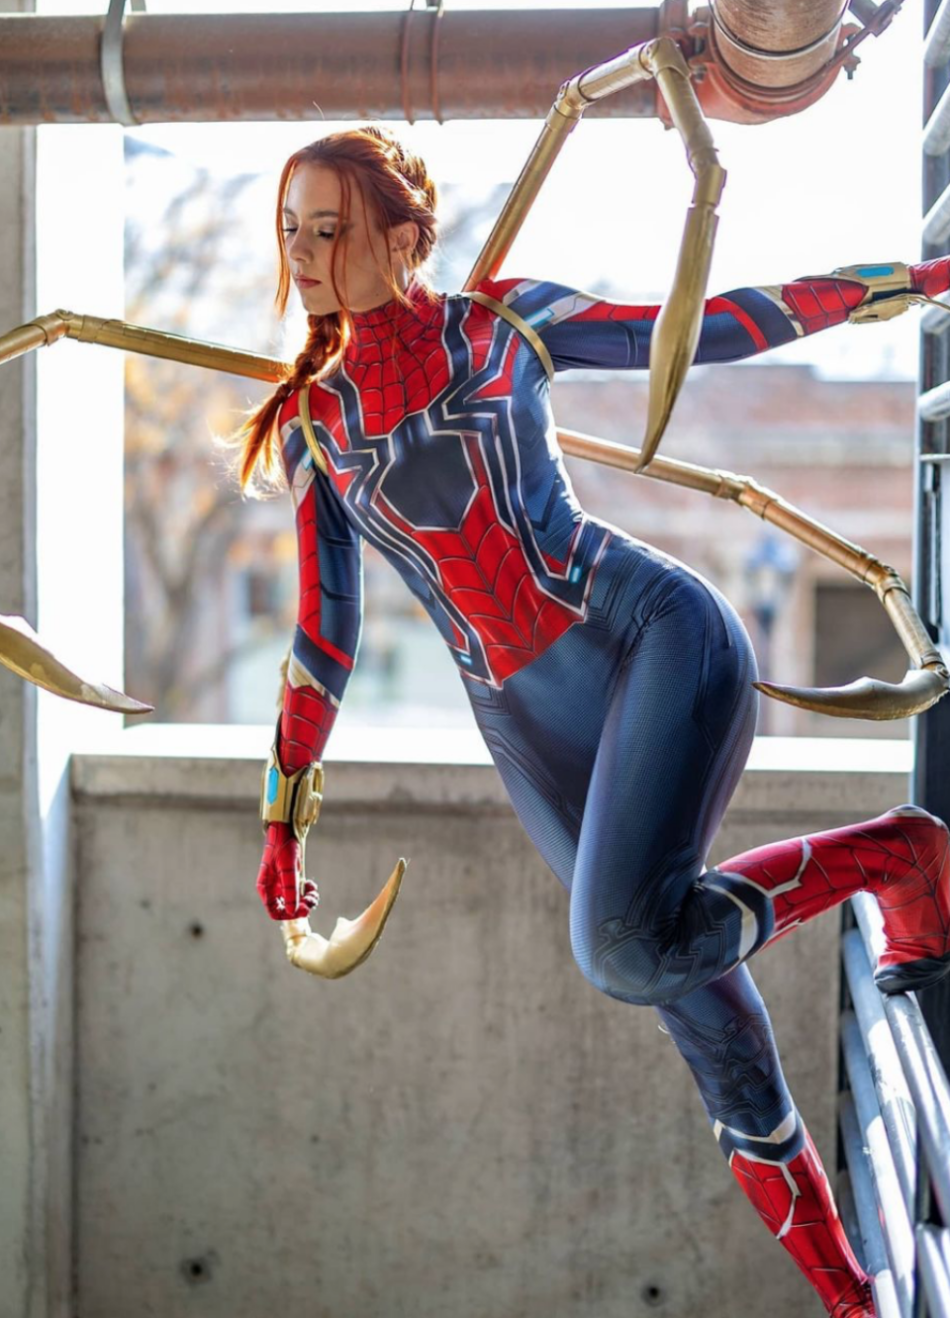 Sexy Red Hot Cosplay Girls Spiderman Women Best Photo Compilation 2021 (89 HQ Photos) 21